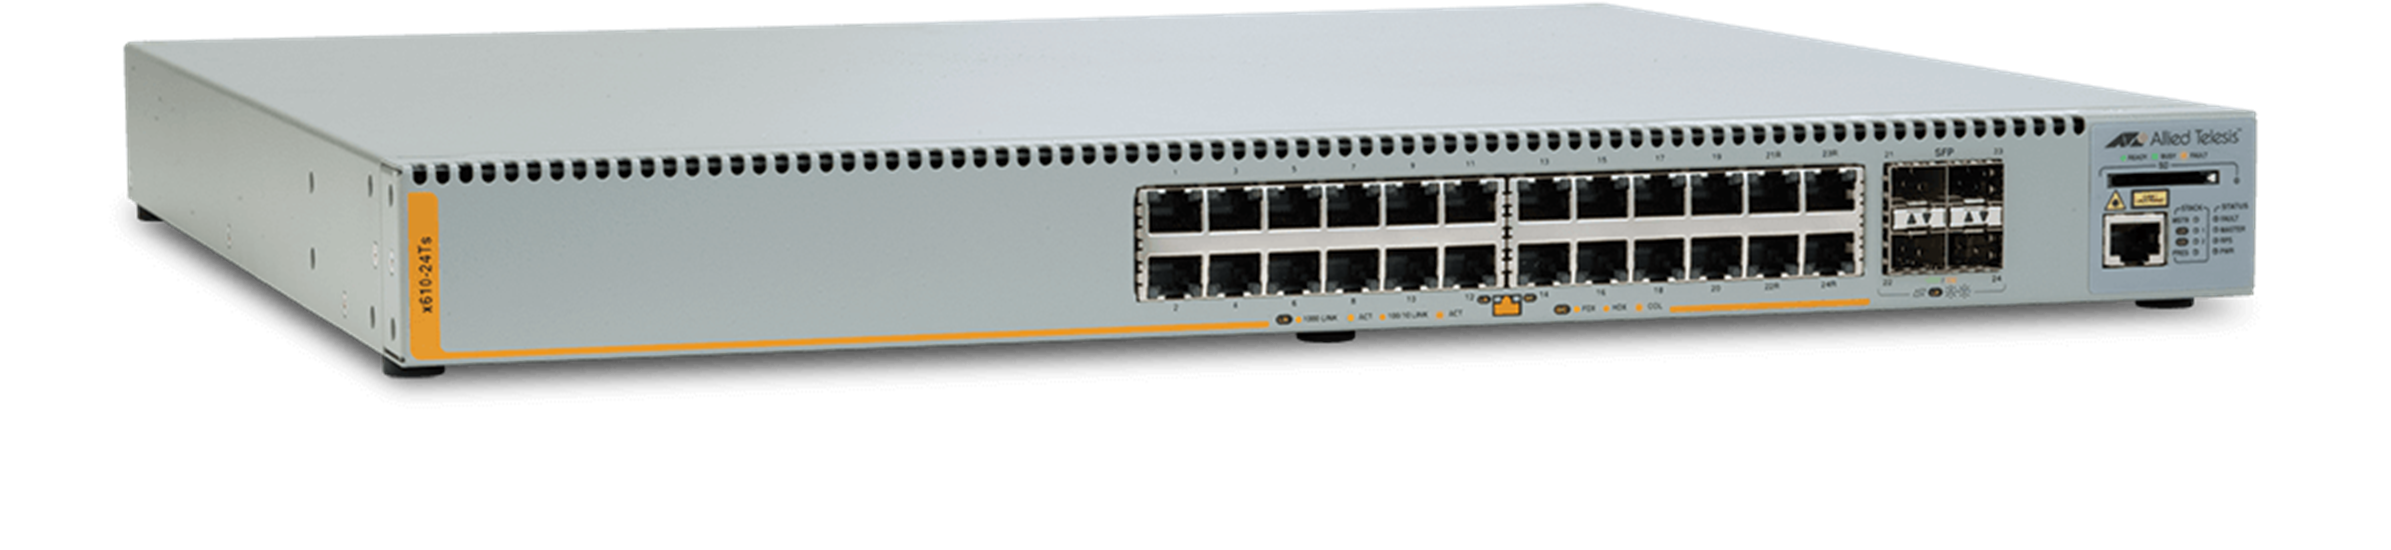 AT-x610 series - Advanced Gigabit layer 3 Stackable Switch